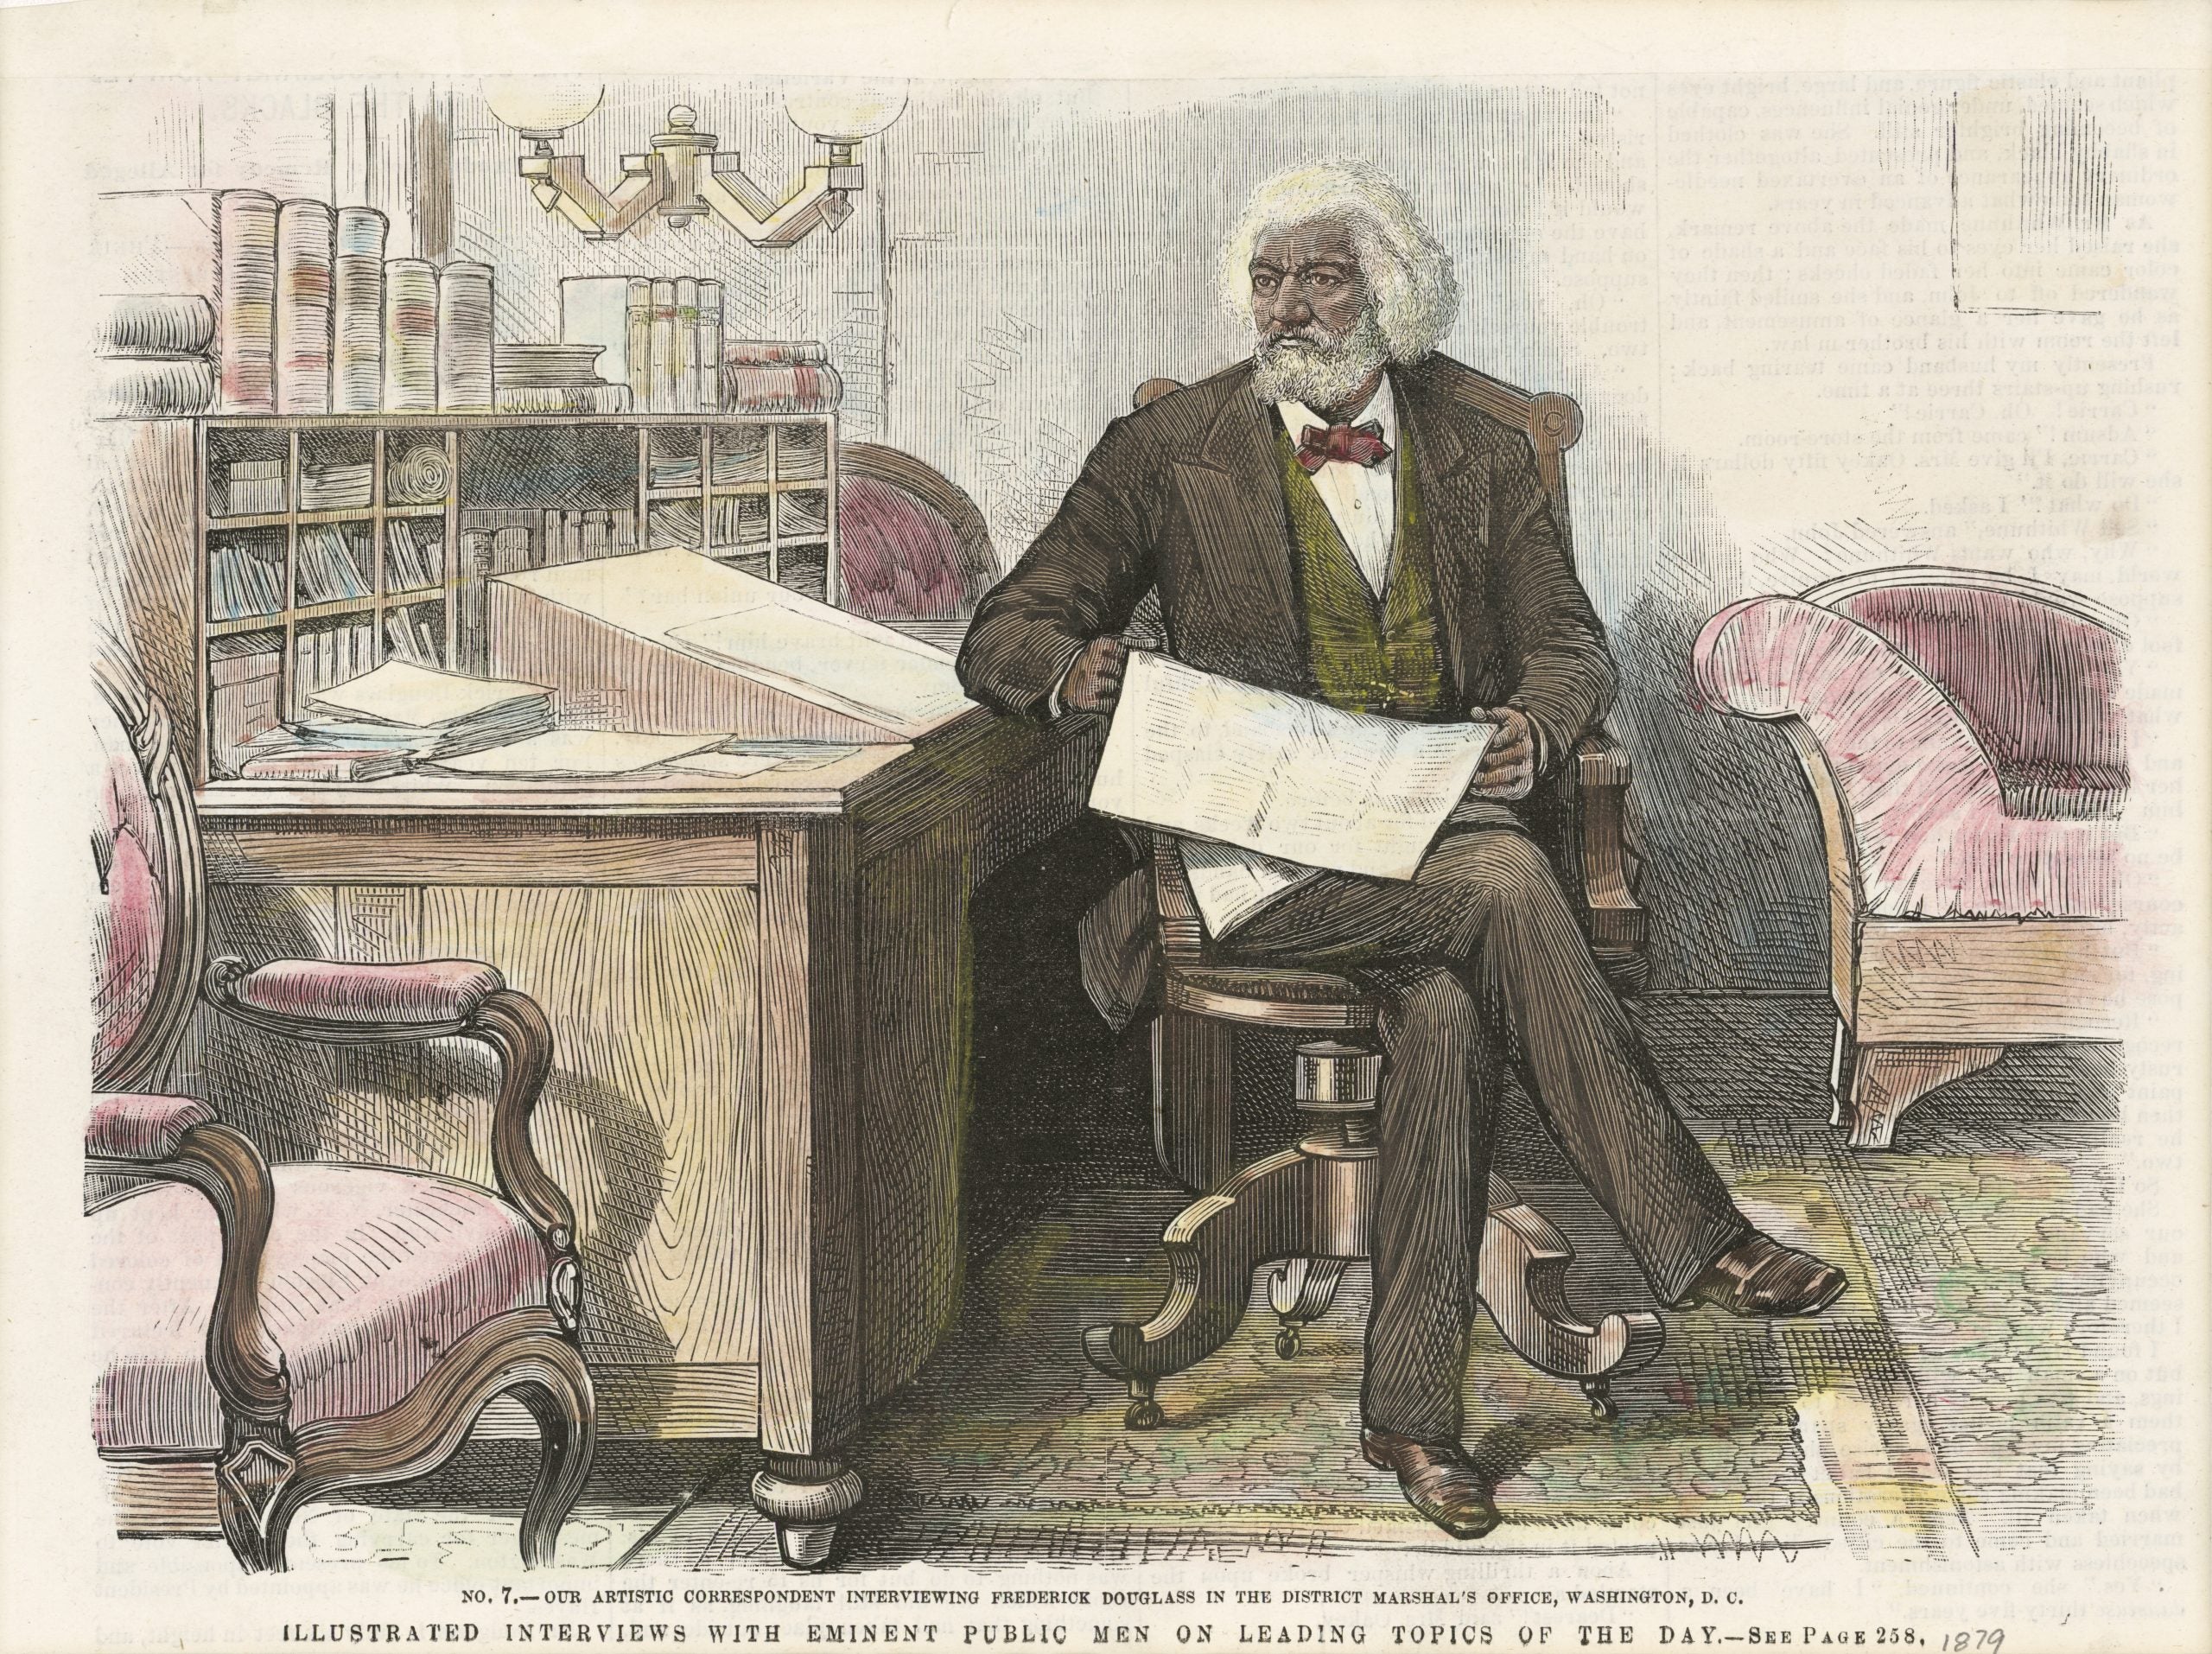 What Do Valentine’s Day and Frederick Douglass Have In Common?